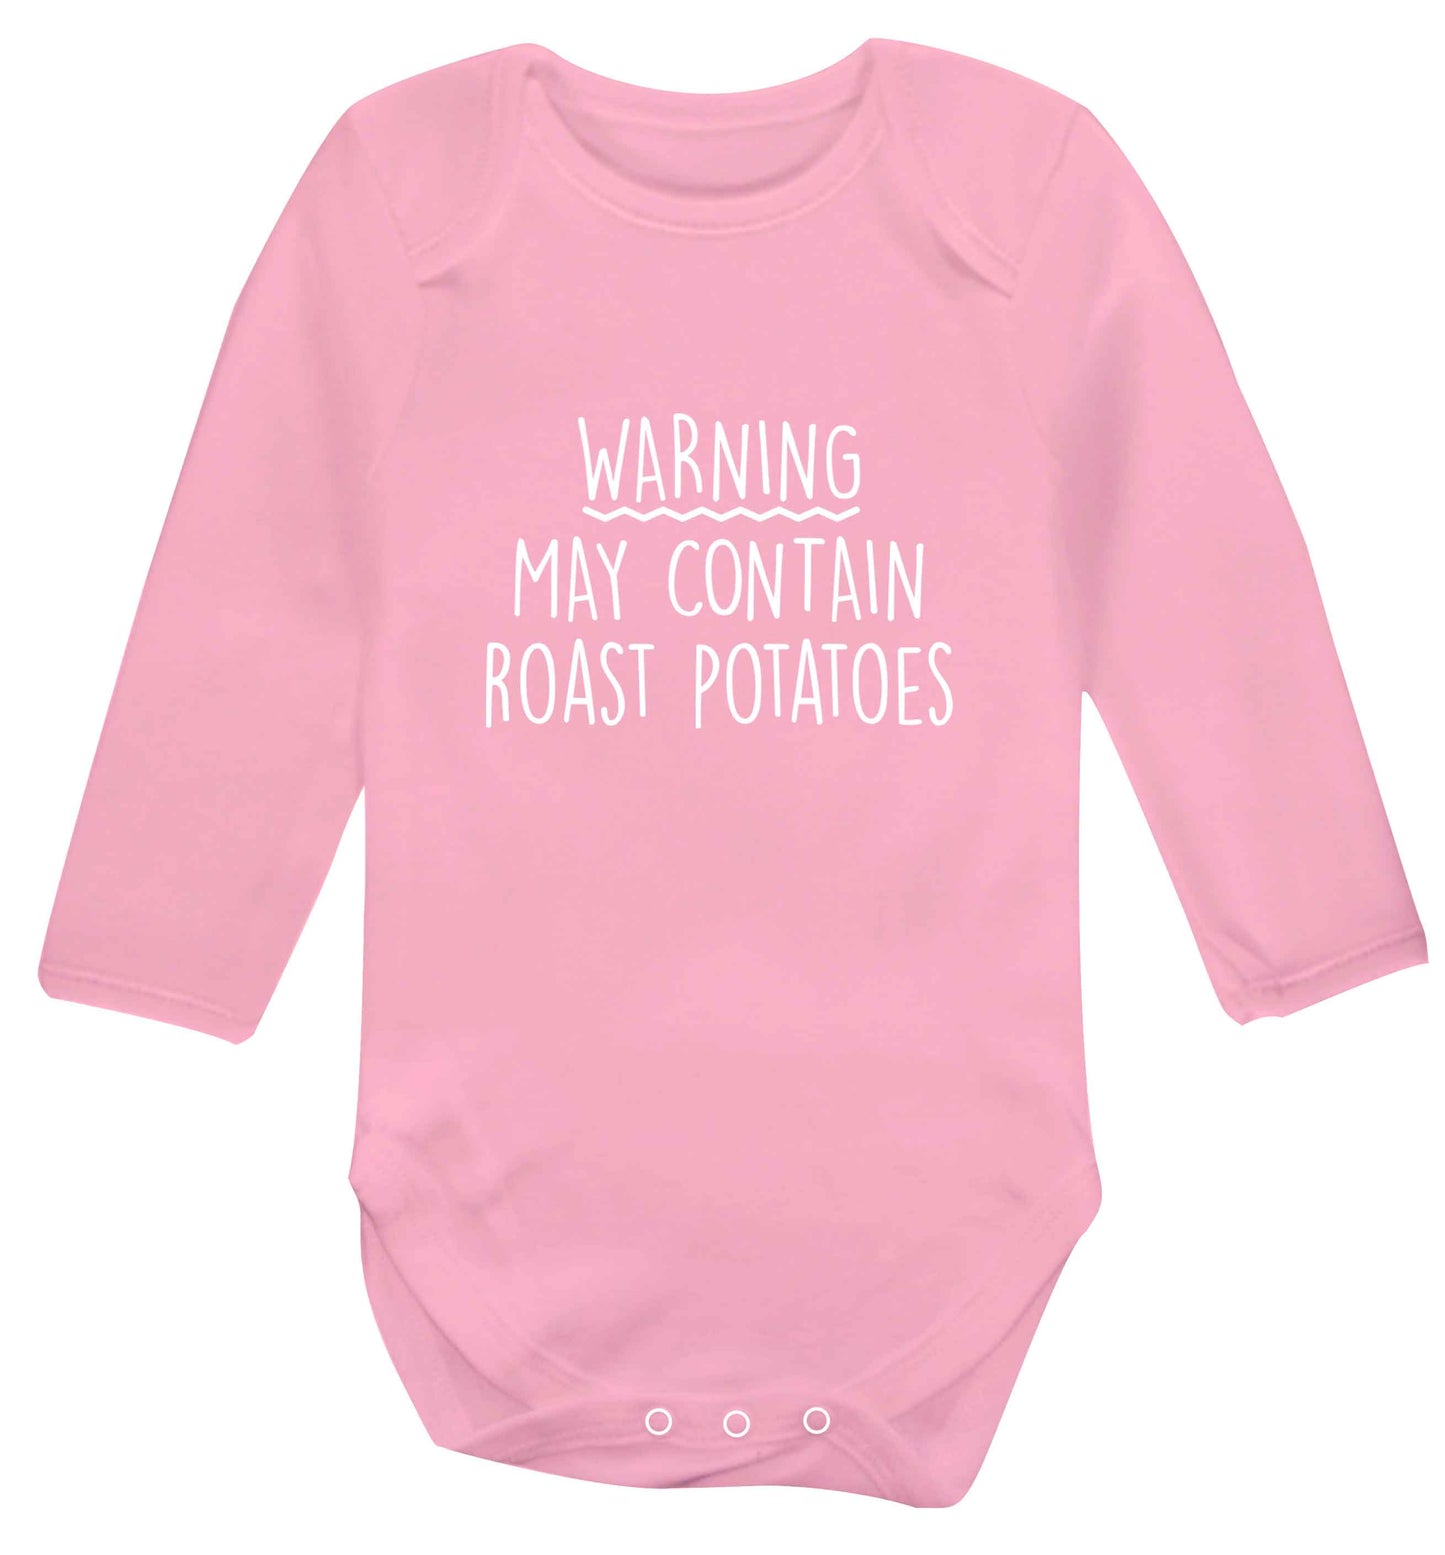 Warning may containg roast potatoes baby vest long sleeved pale pink 6-12 months